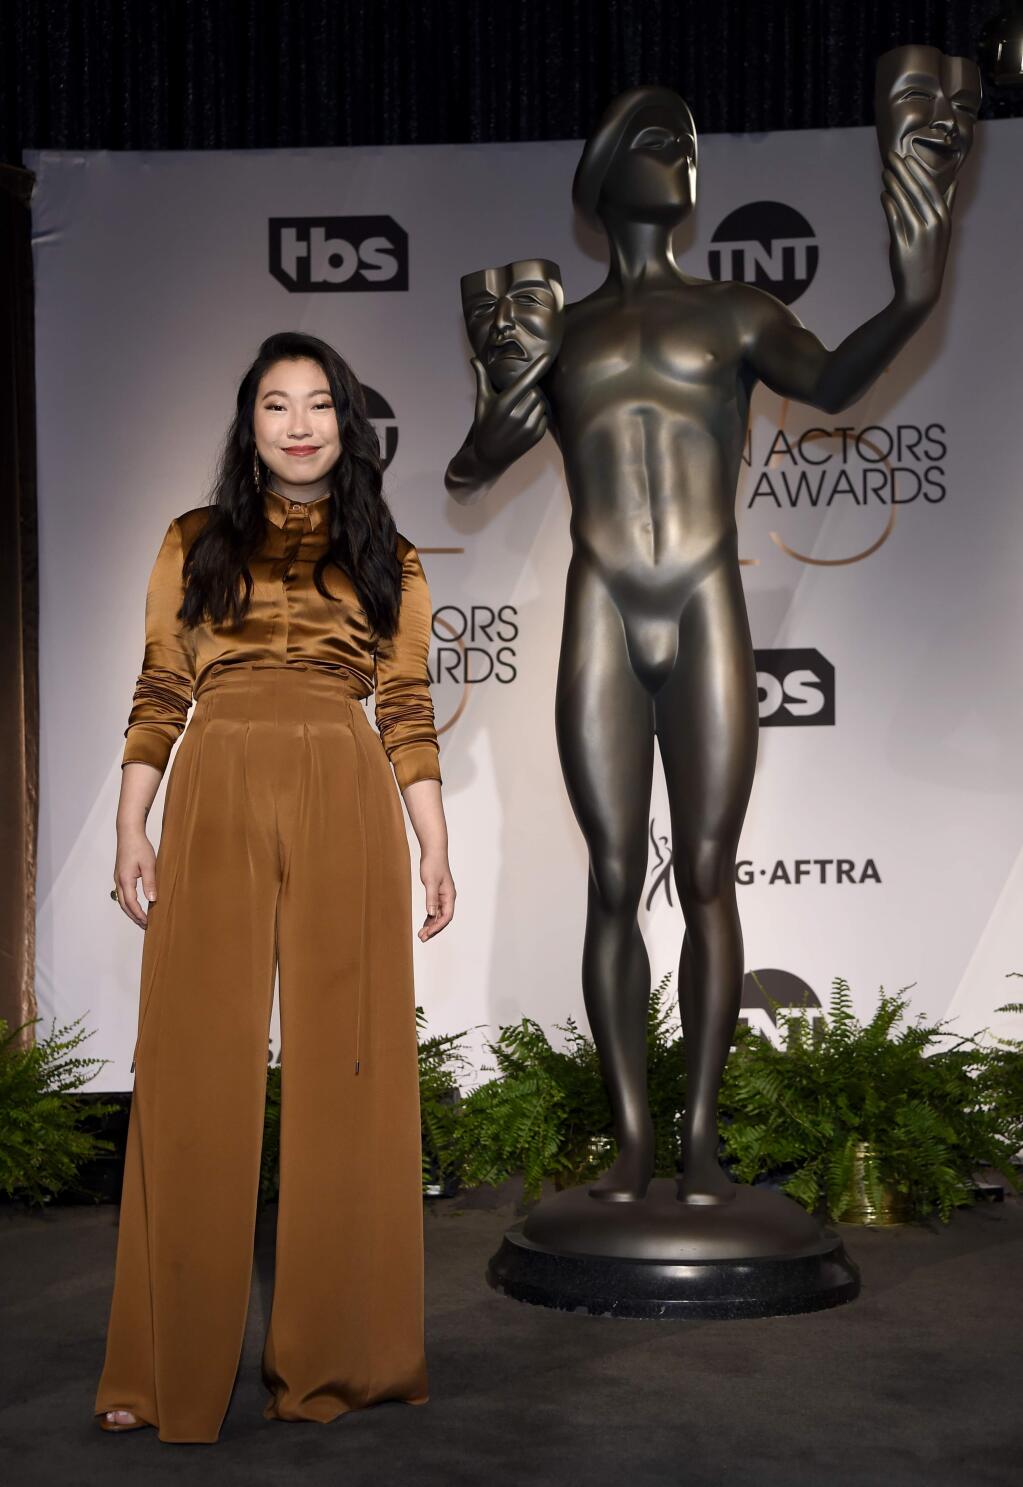 Awkwafina poses following the nominations announcement for the 25th annual Screen Actors Guild Awards at the Pacific Design Center on Wednesday, Dec. 12, 2018, in West Hollywood, Calif. The show will be held on Sunday, Jan. 27, 2019, in Los Angeles. (Photo by Chris Pizzello/Invision/AP)